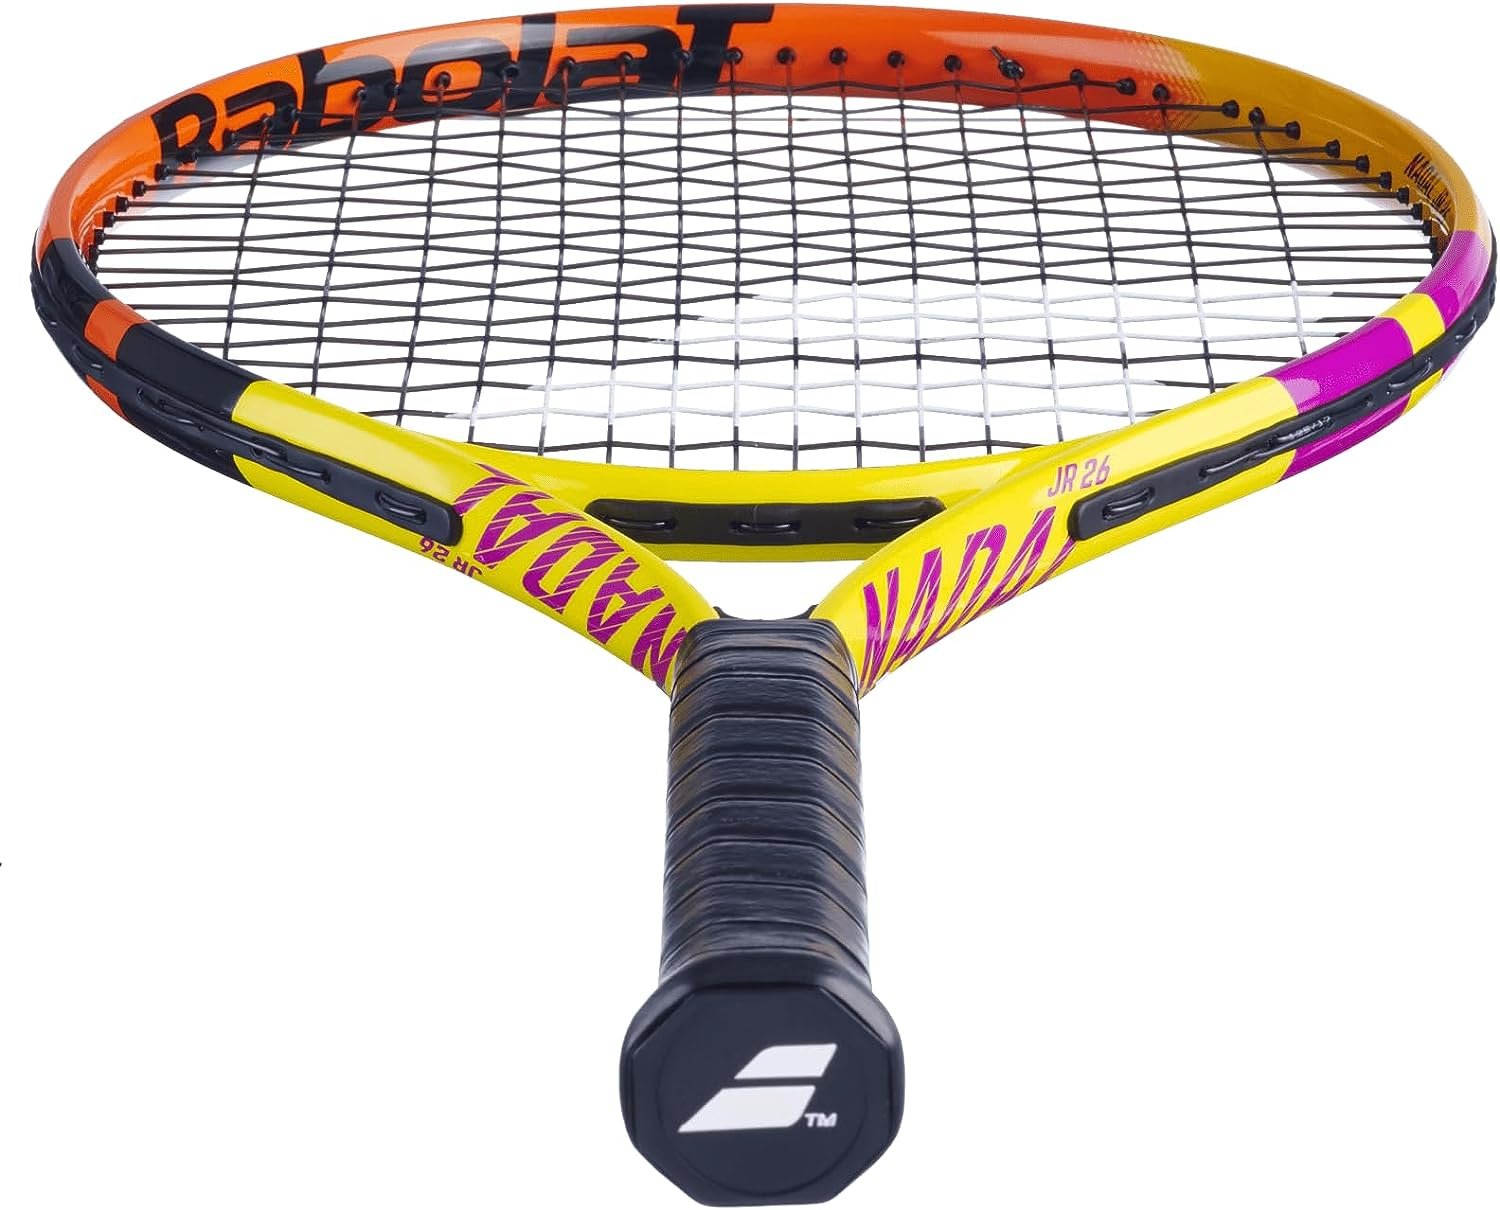 Babolat Nadal Junior Tennis Racquet (Rafa Edition) Bundled with a Club Backpack or Bag and 3 Tennis Balls